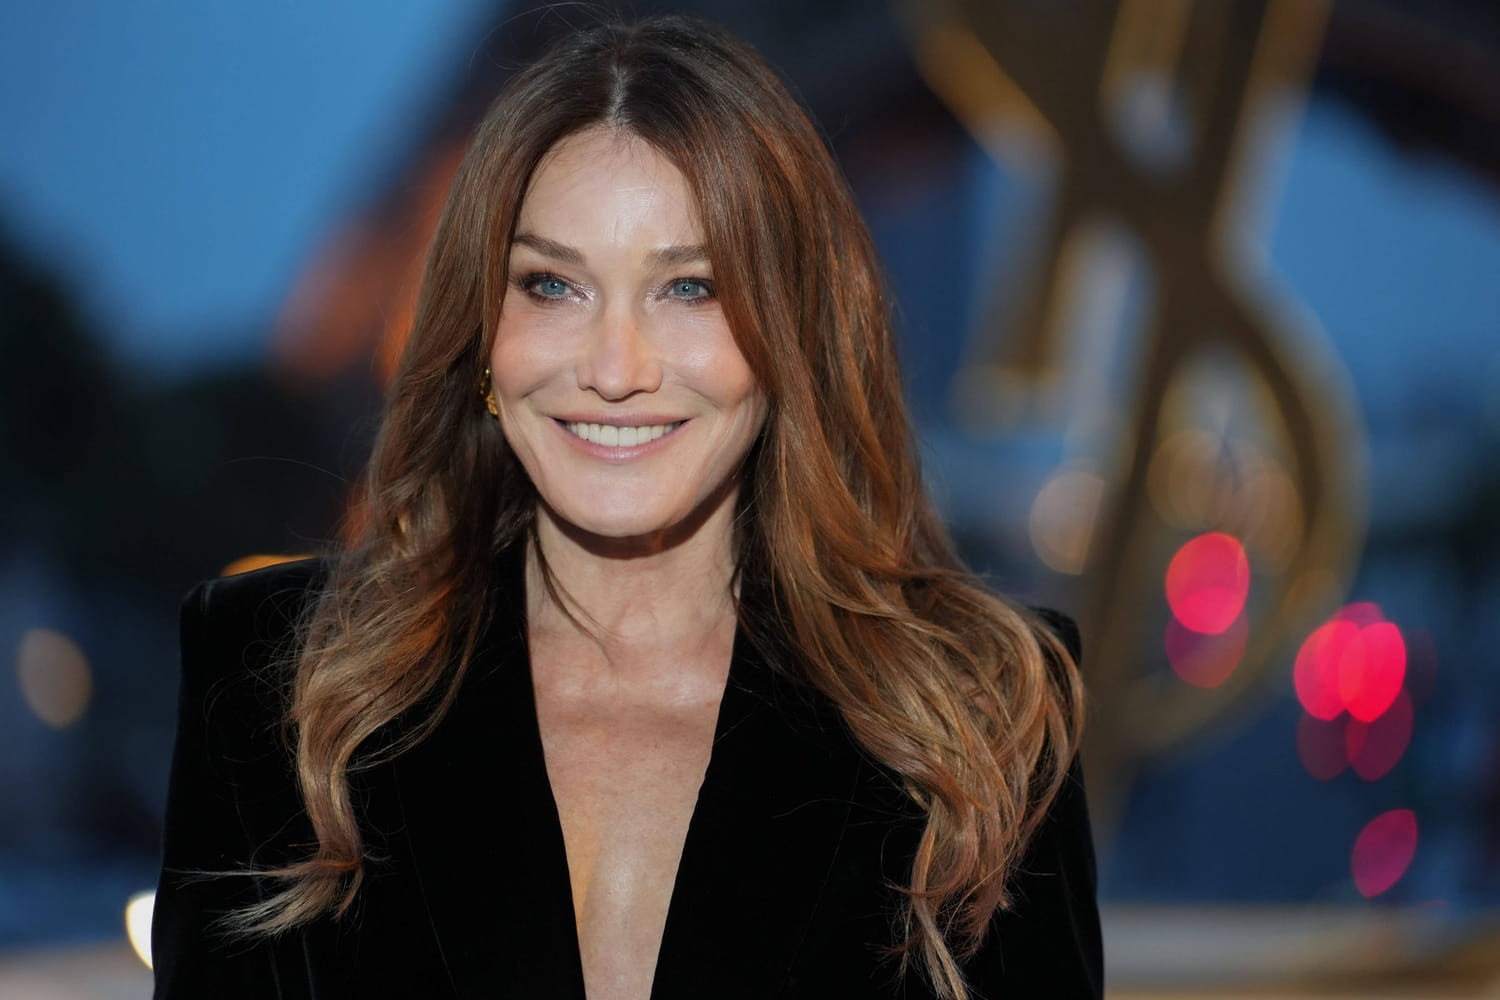 In her long, tight velvet dress, Carla Bruni proves that she is the queen of fashion